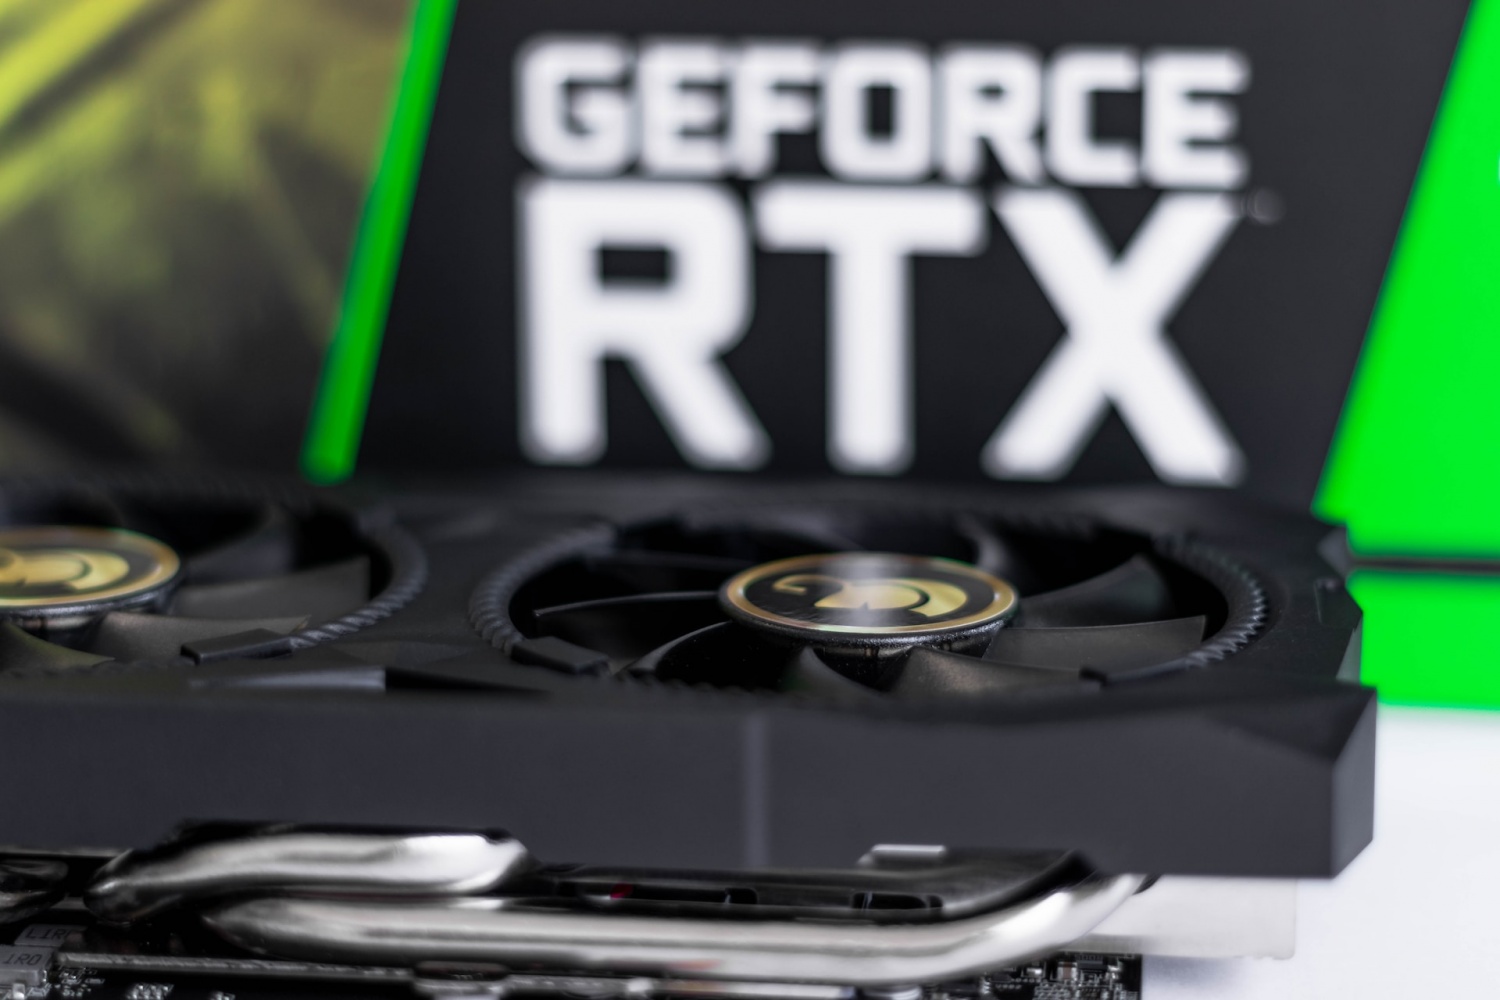 GALAX GeForce RTX 4080 SG Review - The Quad Cooler Returns!